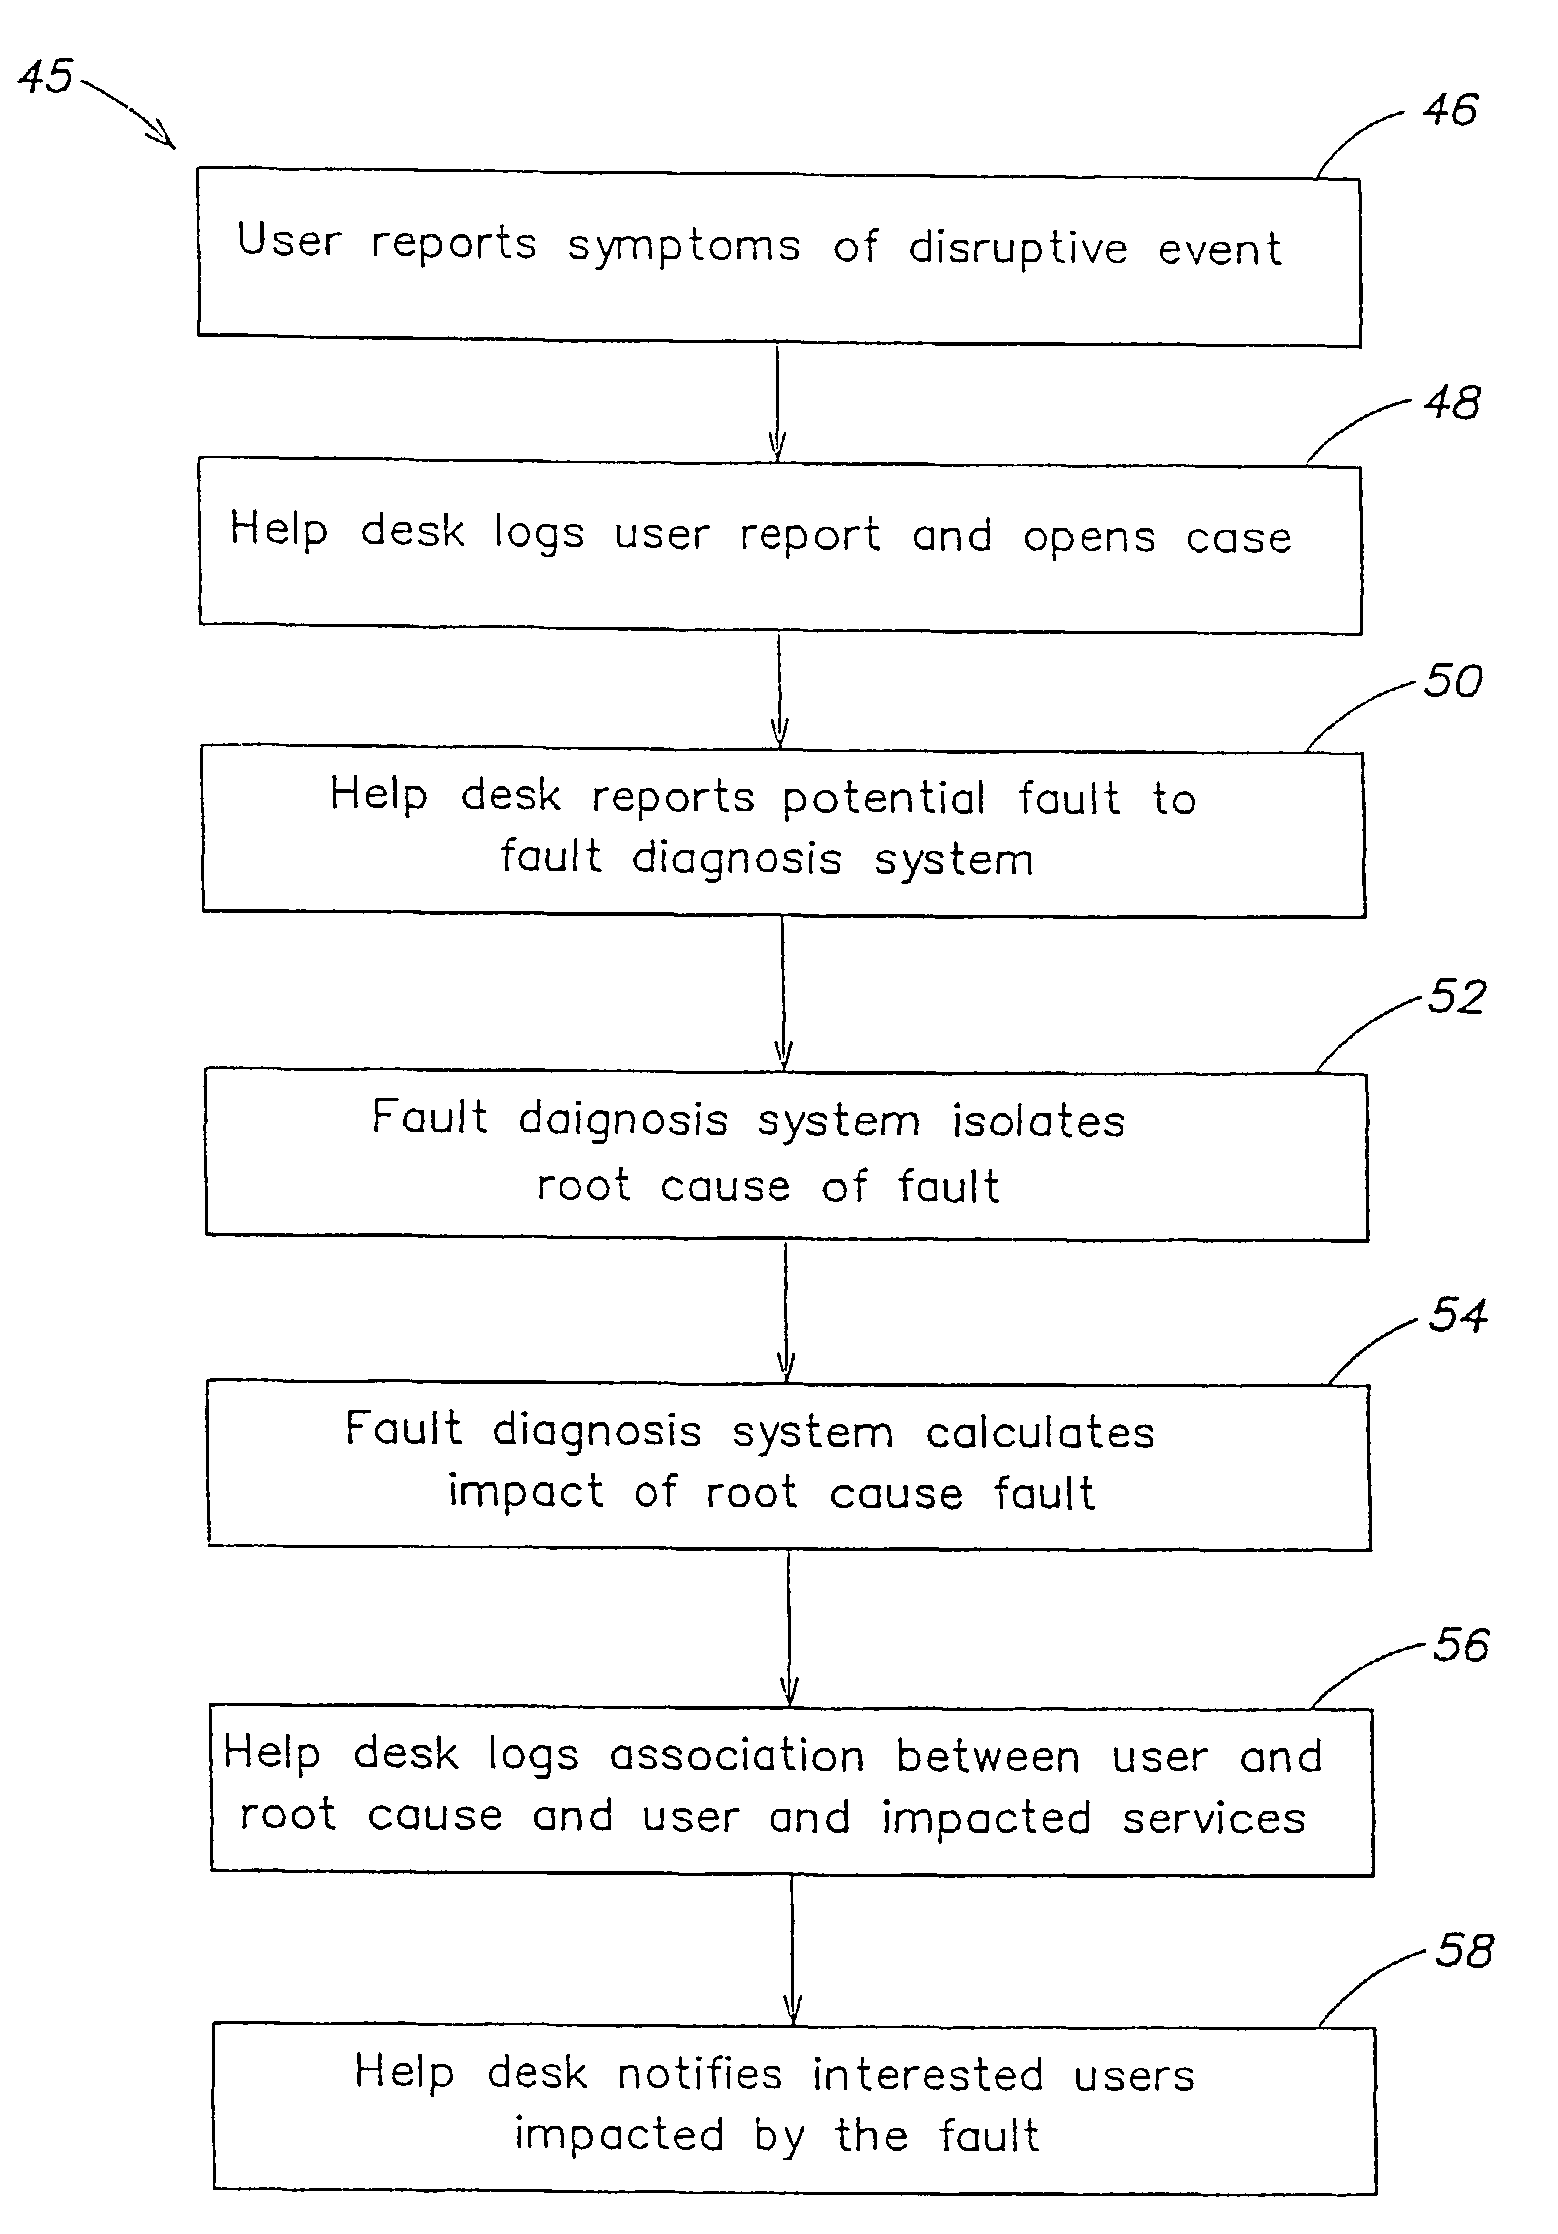 Help desk systems and methods for use with communications networks